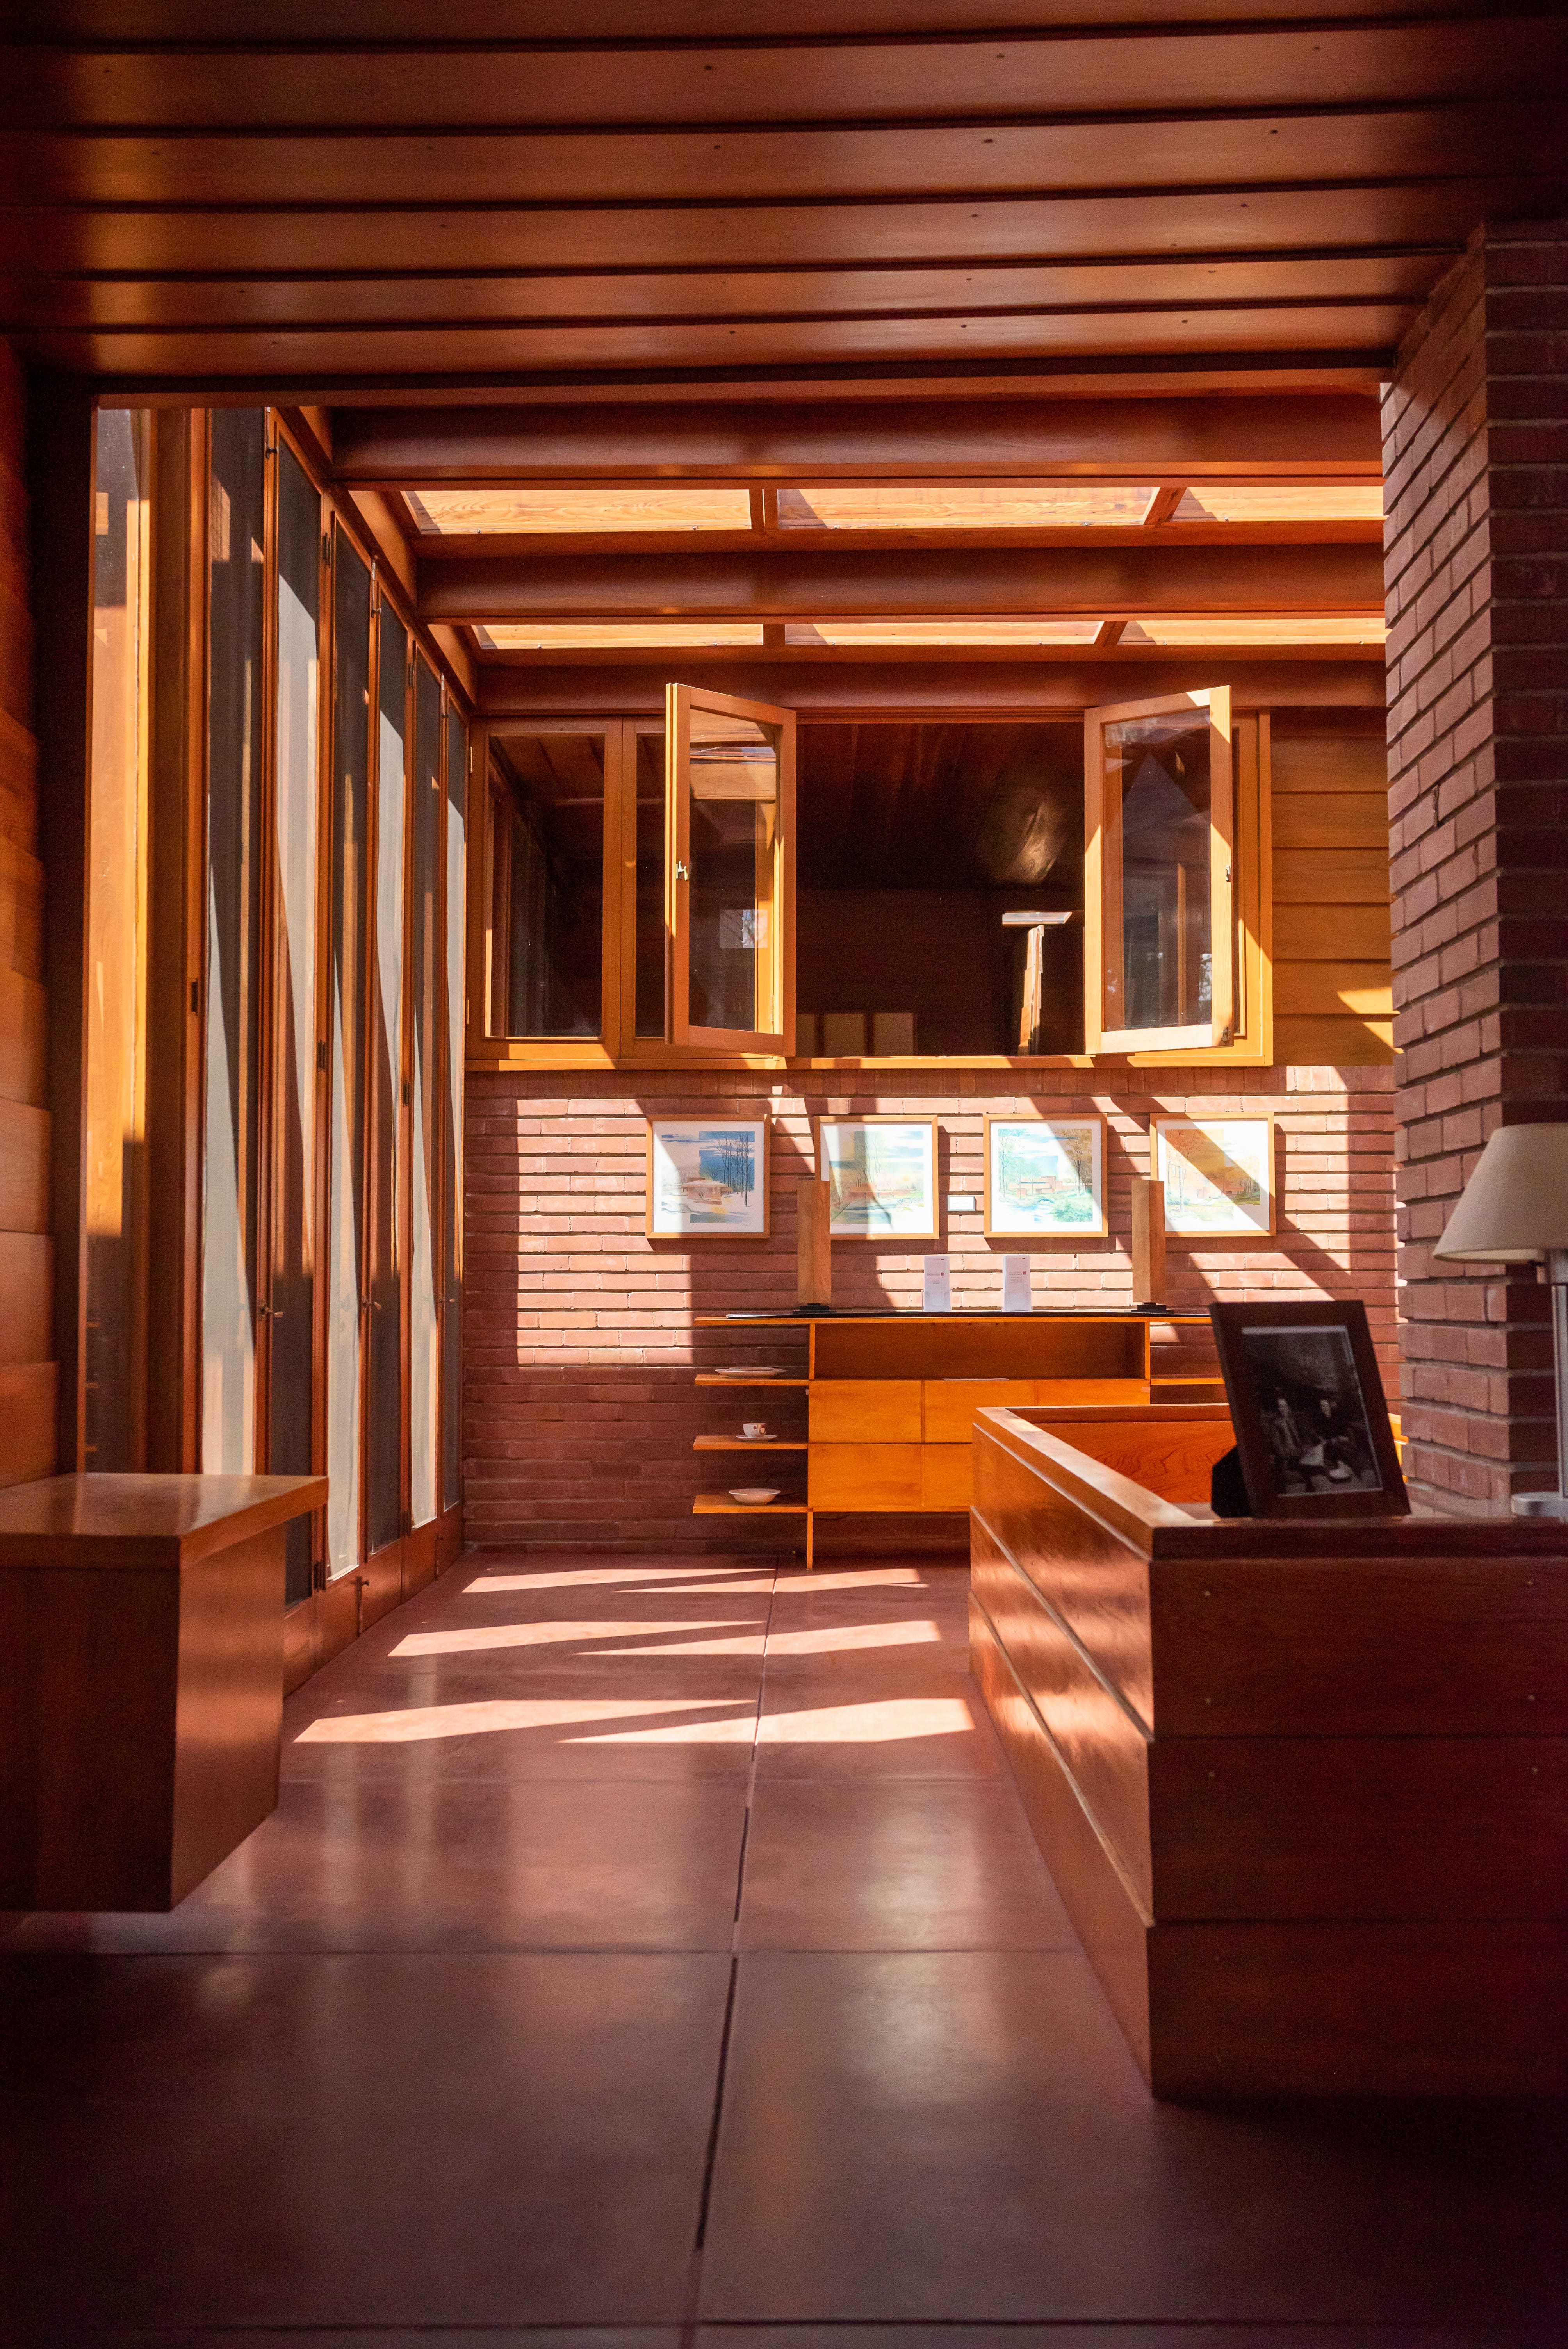 Light streams into the entryway known as a loggia.